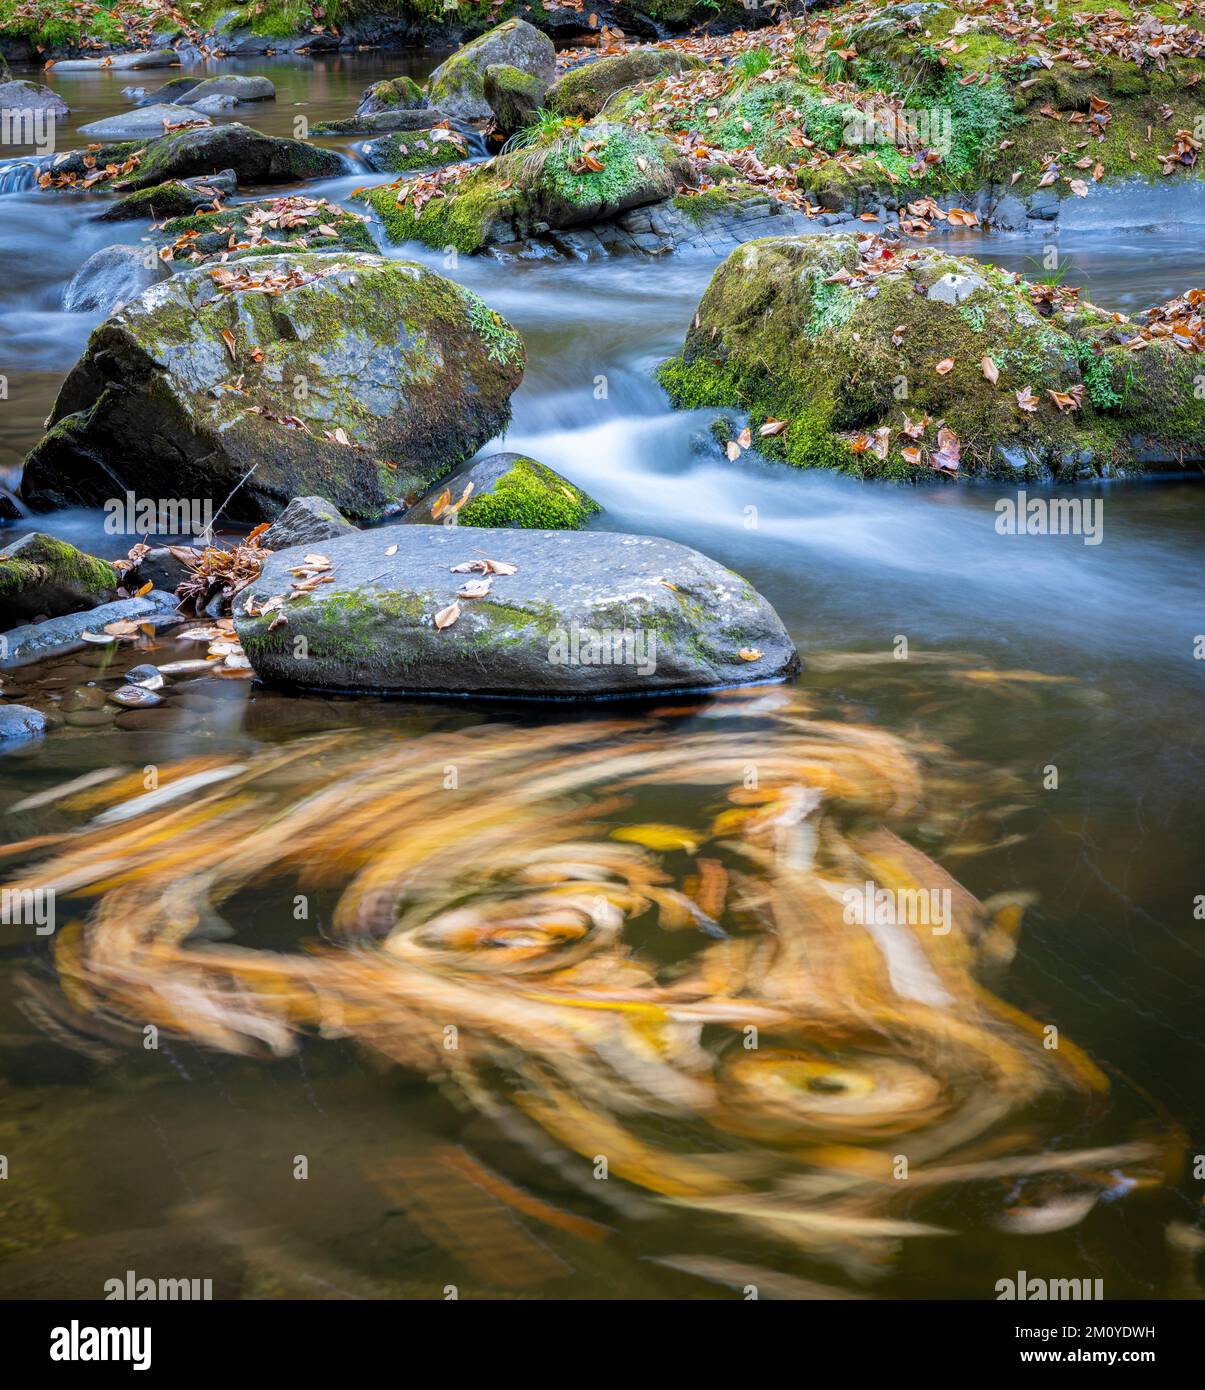 Eddy, Swiirling Leaves, Great Smoky Mountains NP, Herbst, TN, USA, von Dominique Braud/Dembinsky Photo Assoc Stockfoto